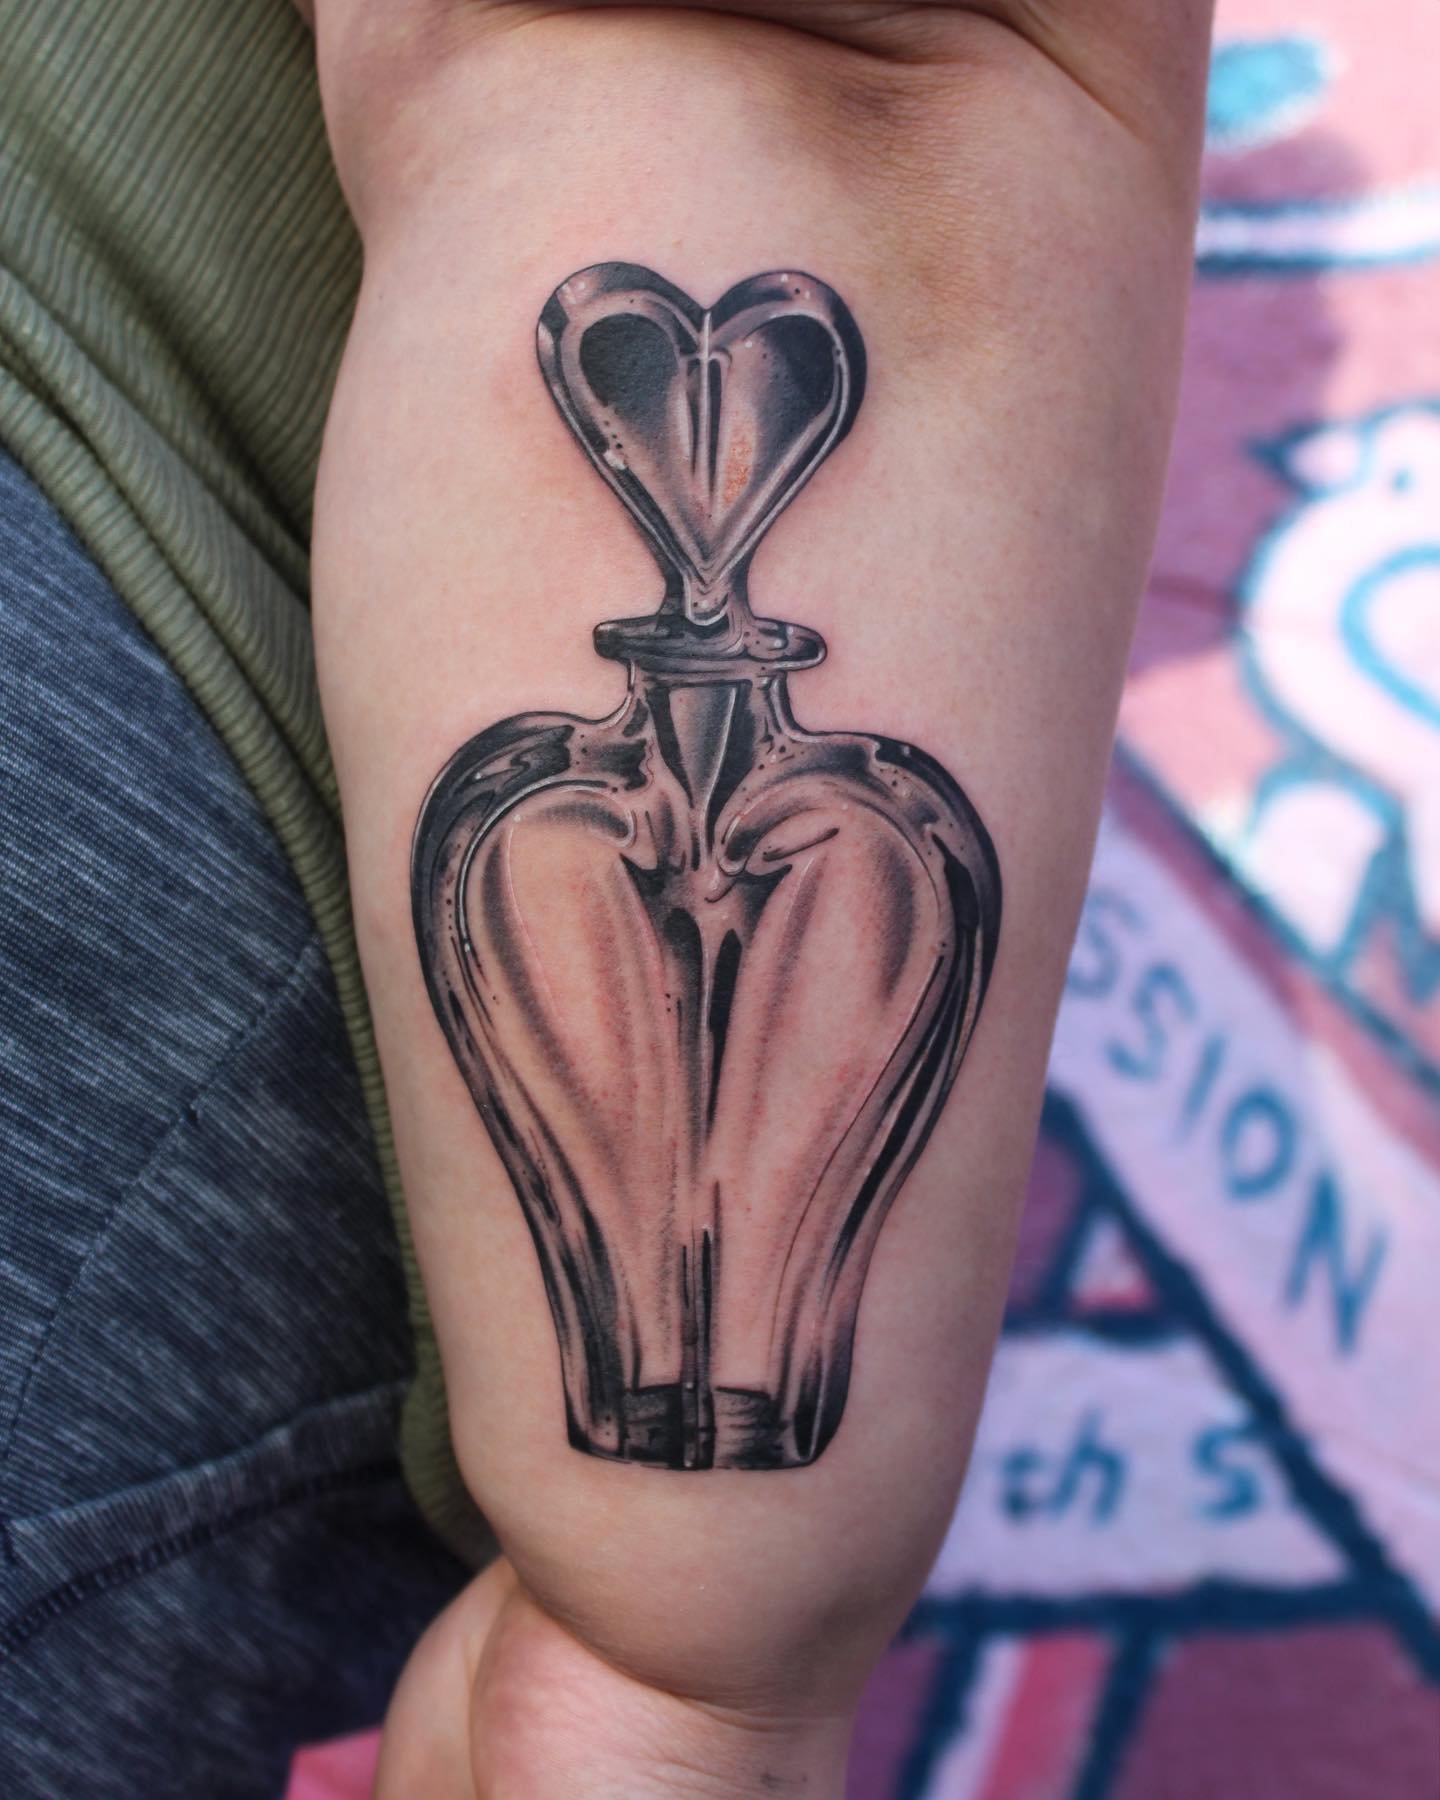 Perfume bottle from my flash in honor of her mother. Thank you Kimberlie for getting this one and for a great session!

kehrmietattoos.com to book
✧ 
✧
✧
✧ 
✧ 
#tattoo #inked #tattoos #art #blackandgrey #sf #nyc #qttr #blackwork #horror #flash #tatto